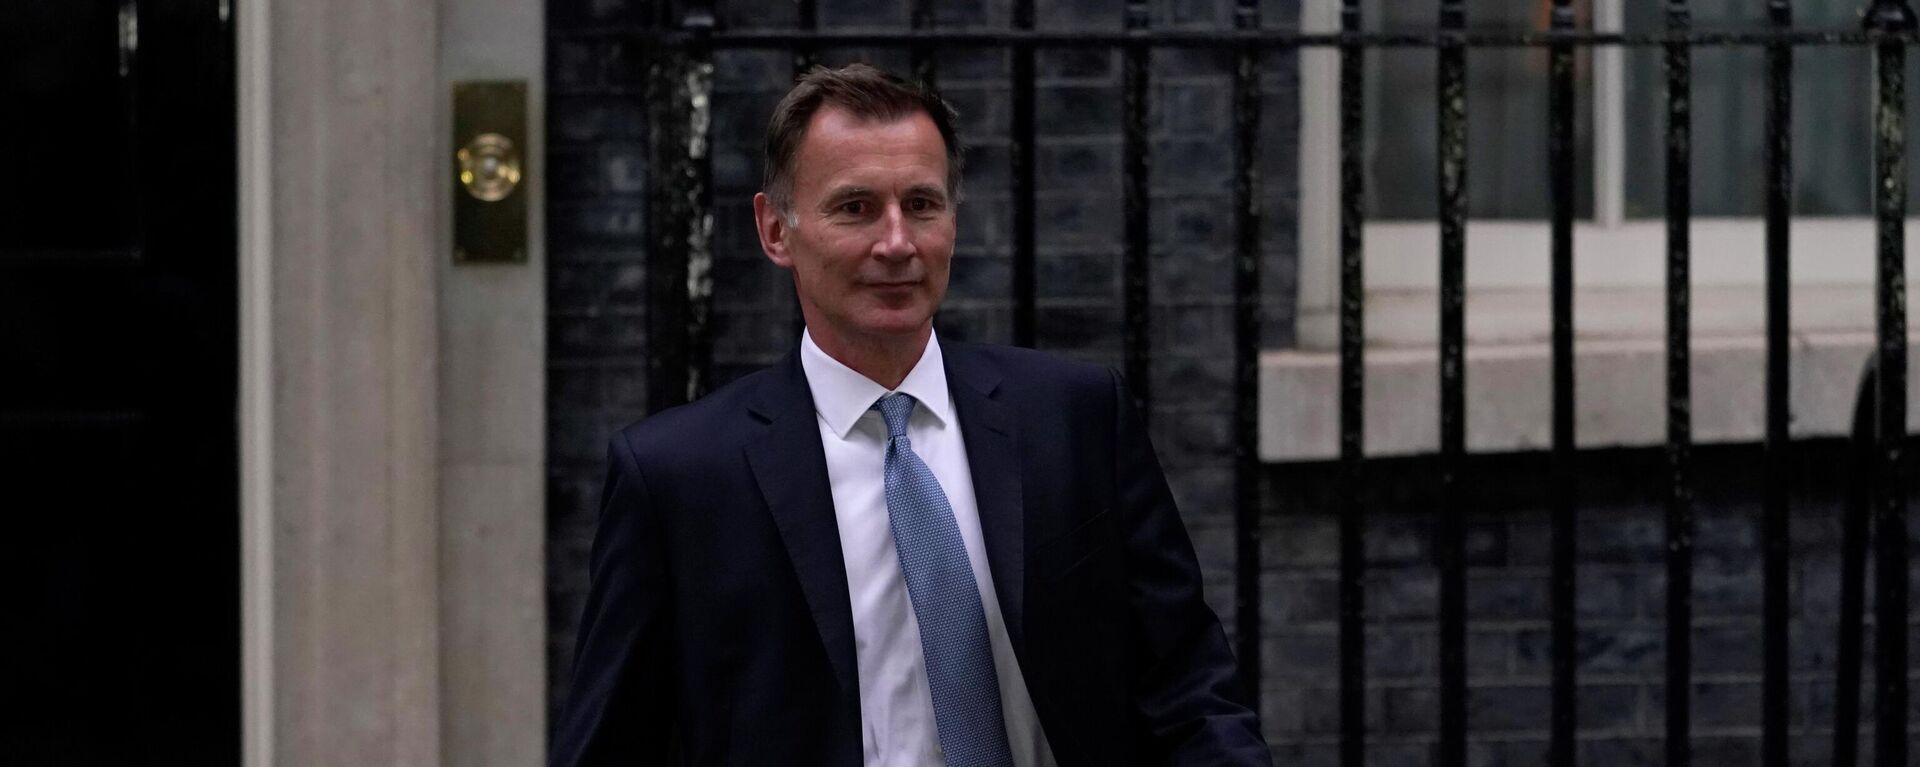 British Chancellor of the Exchequer Jeremy Hunt leaves 10 Downing Street after being appointed by Prime Minister Liz Truss - Sputnik International, 1920, 11.11.2022